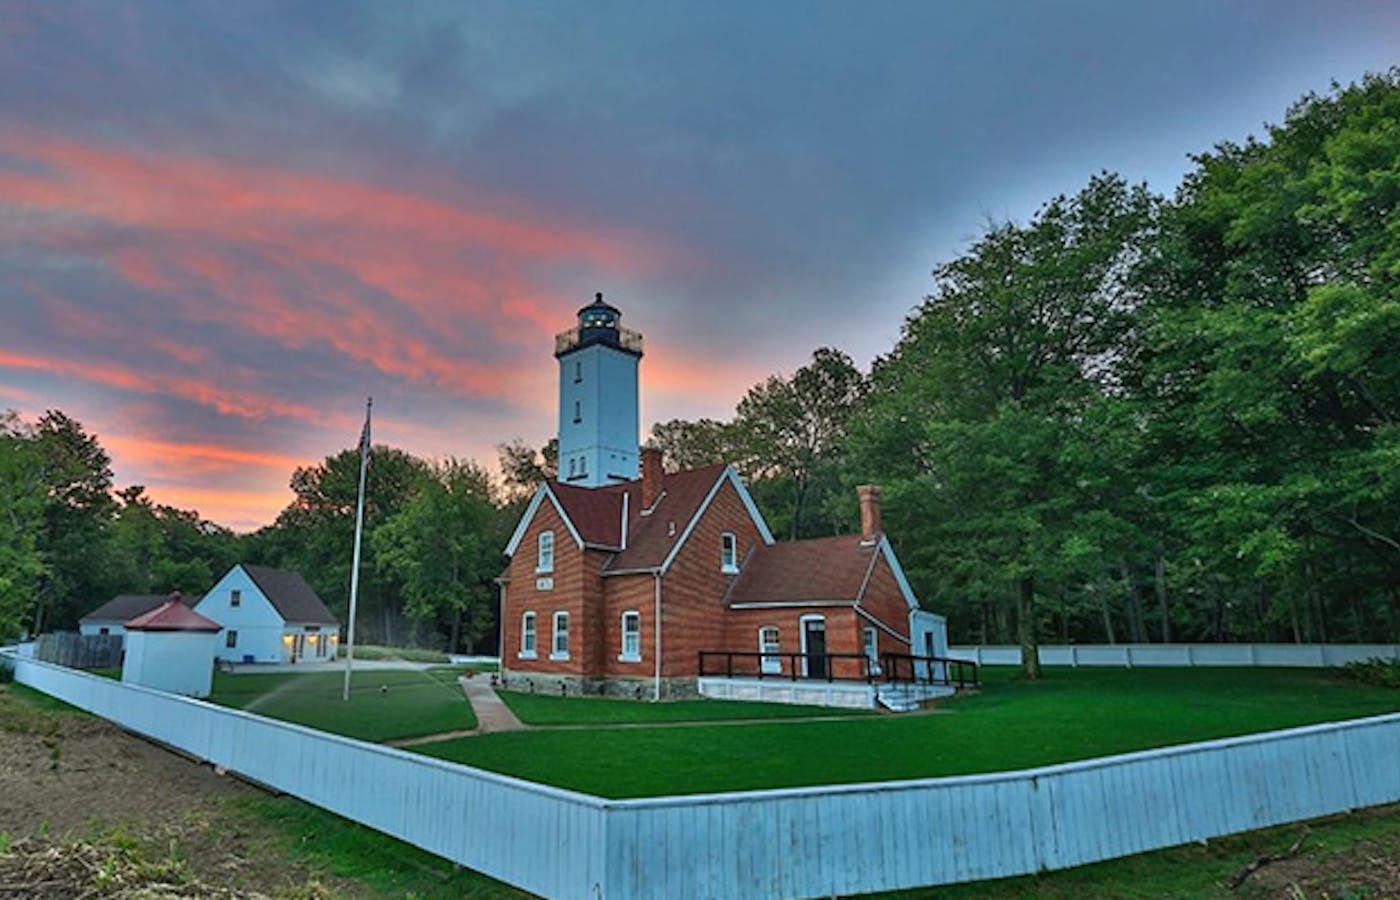 Presque Isle Lighthouse in Erie, Pennsylvania (photo by Brian Berchtold)